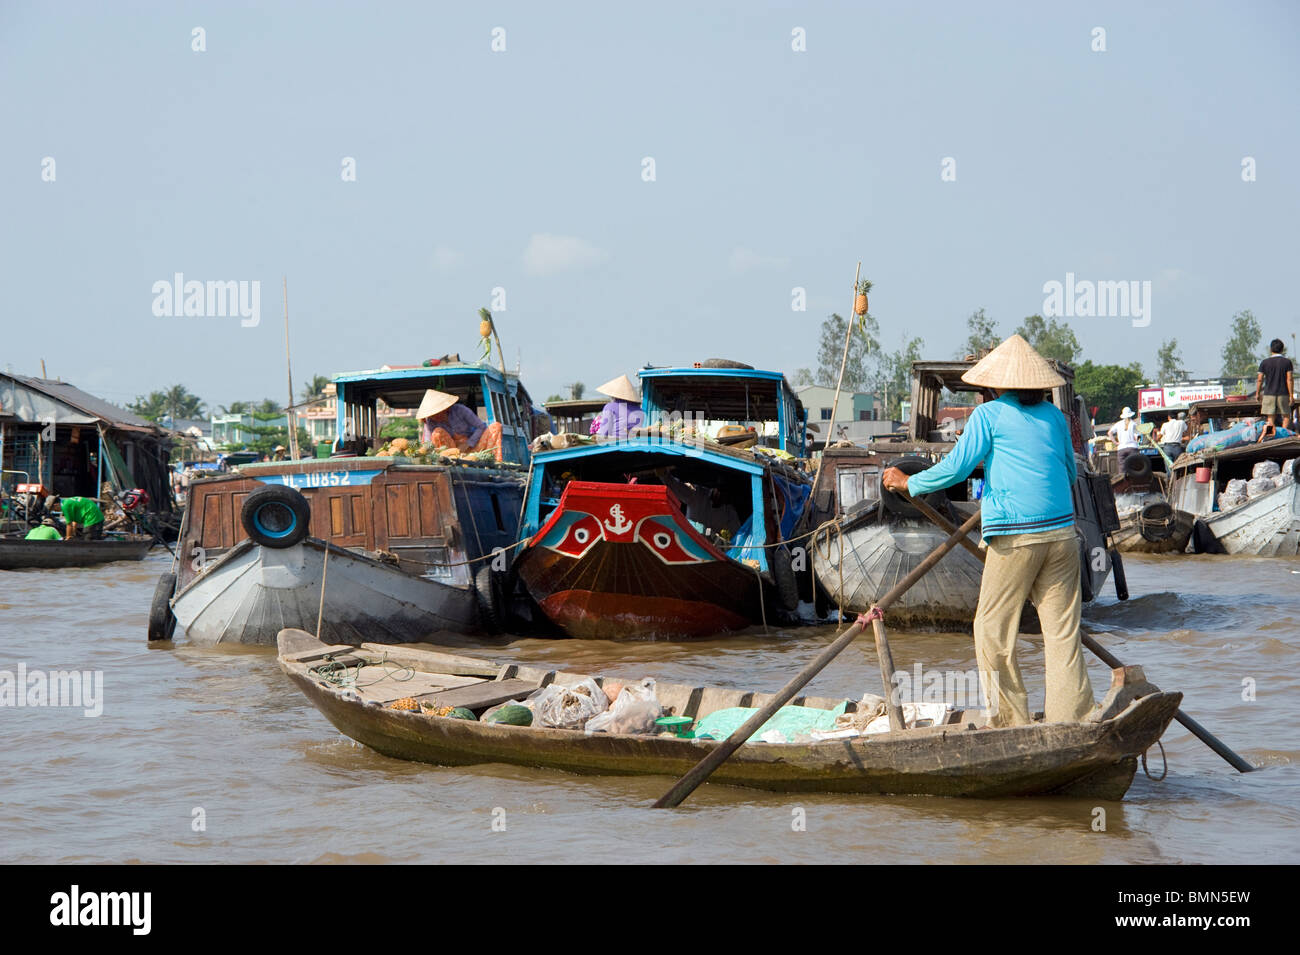 A Vietnamese woman rowing a boat at the Cai Rang floating market in the Mekong Delta area of Vietnam Stock Photo